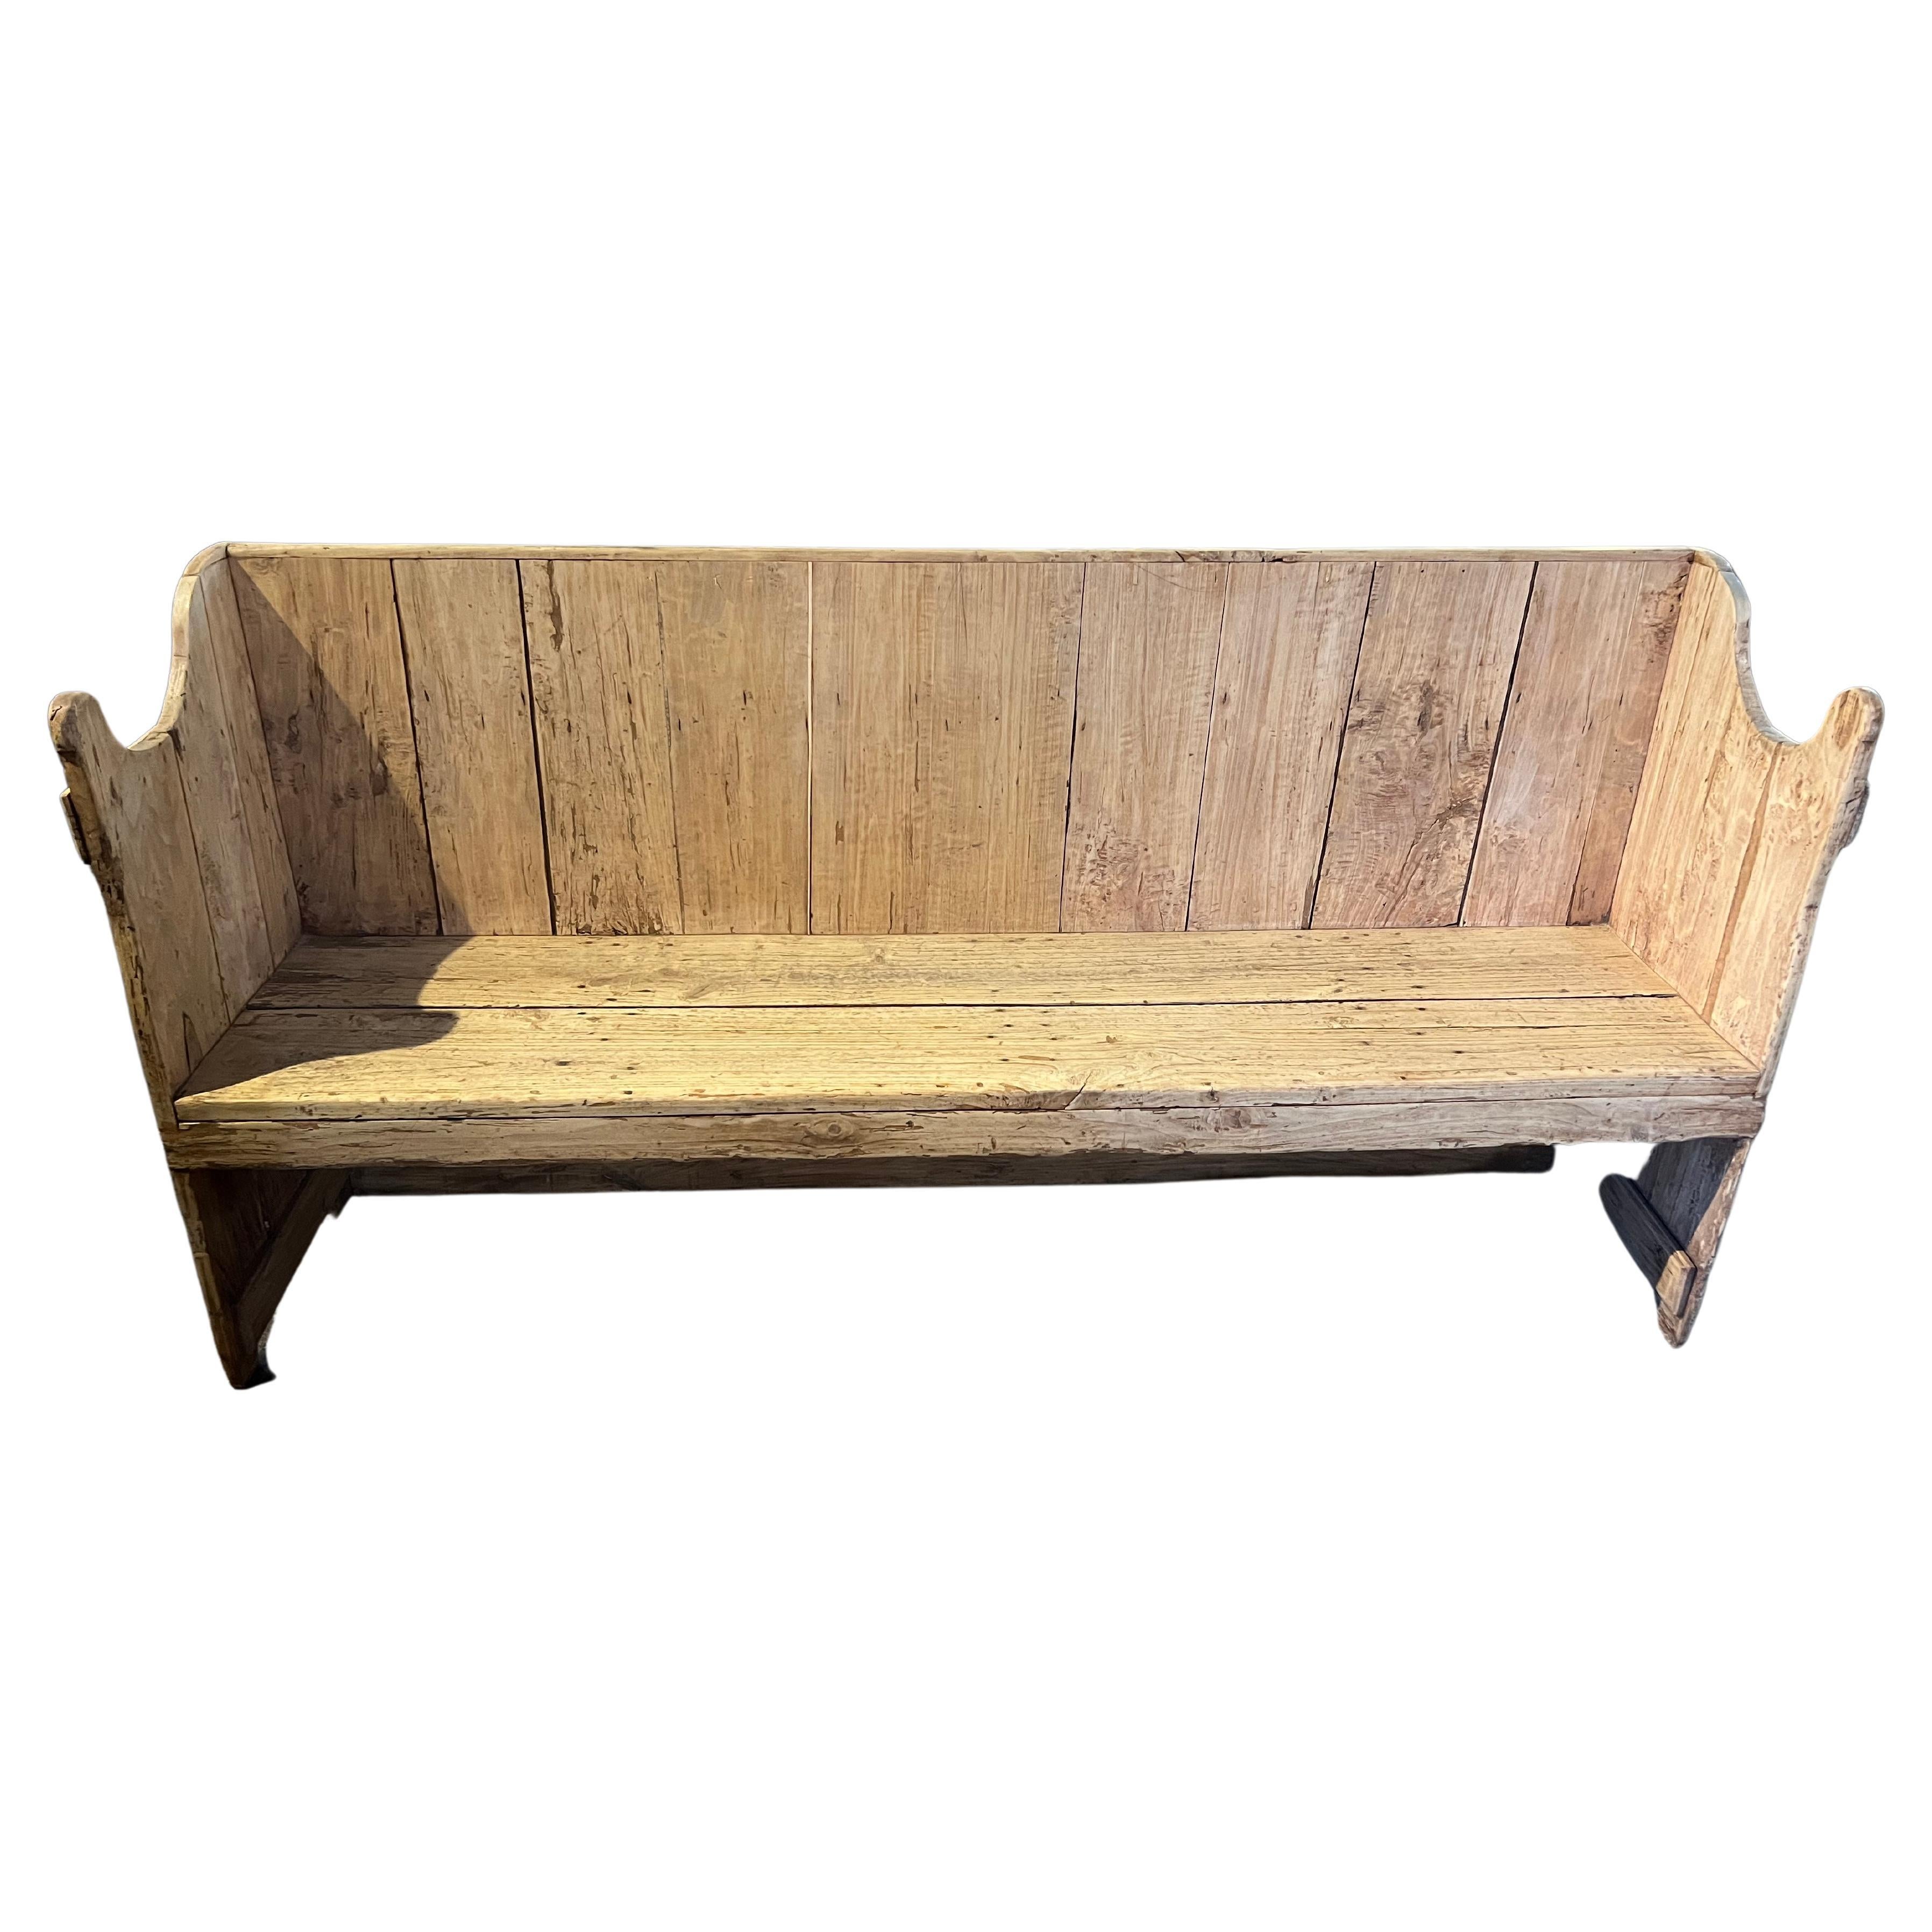 A very handsome early 19th century bench from the Catalan region of Spain. Soundly constructed from washed pine. Wonderful Minimalist lines. The seat height is 18